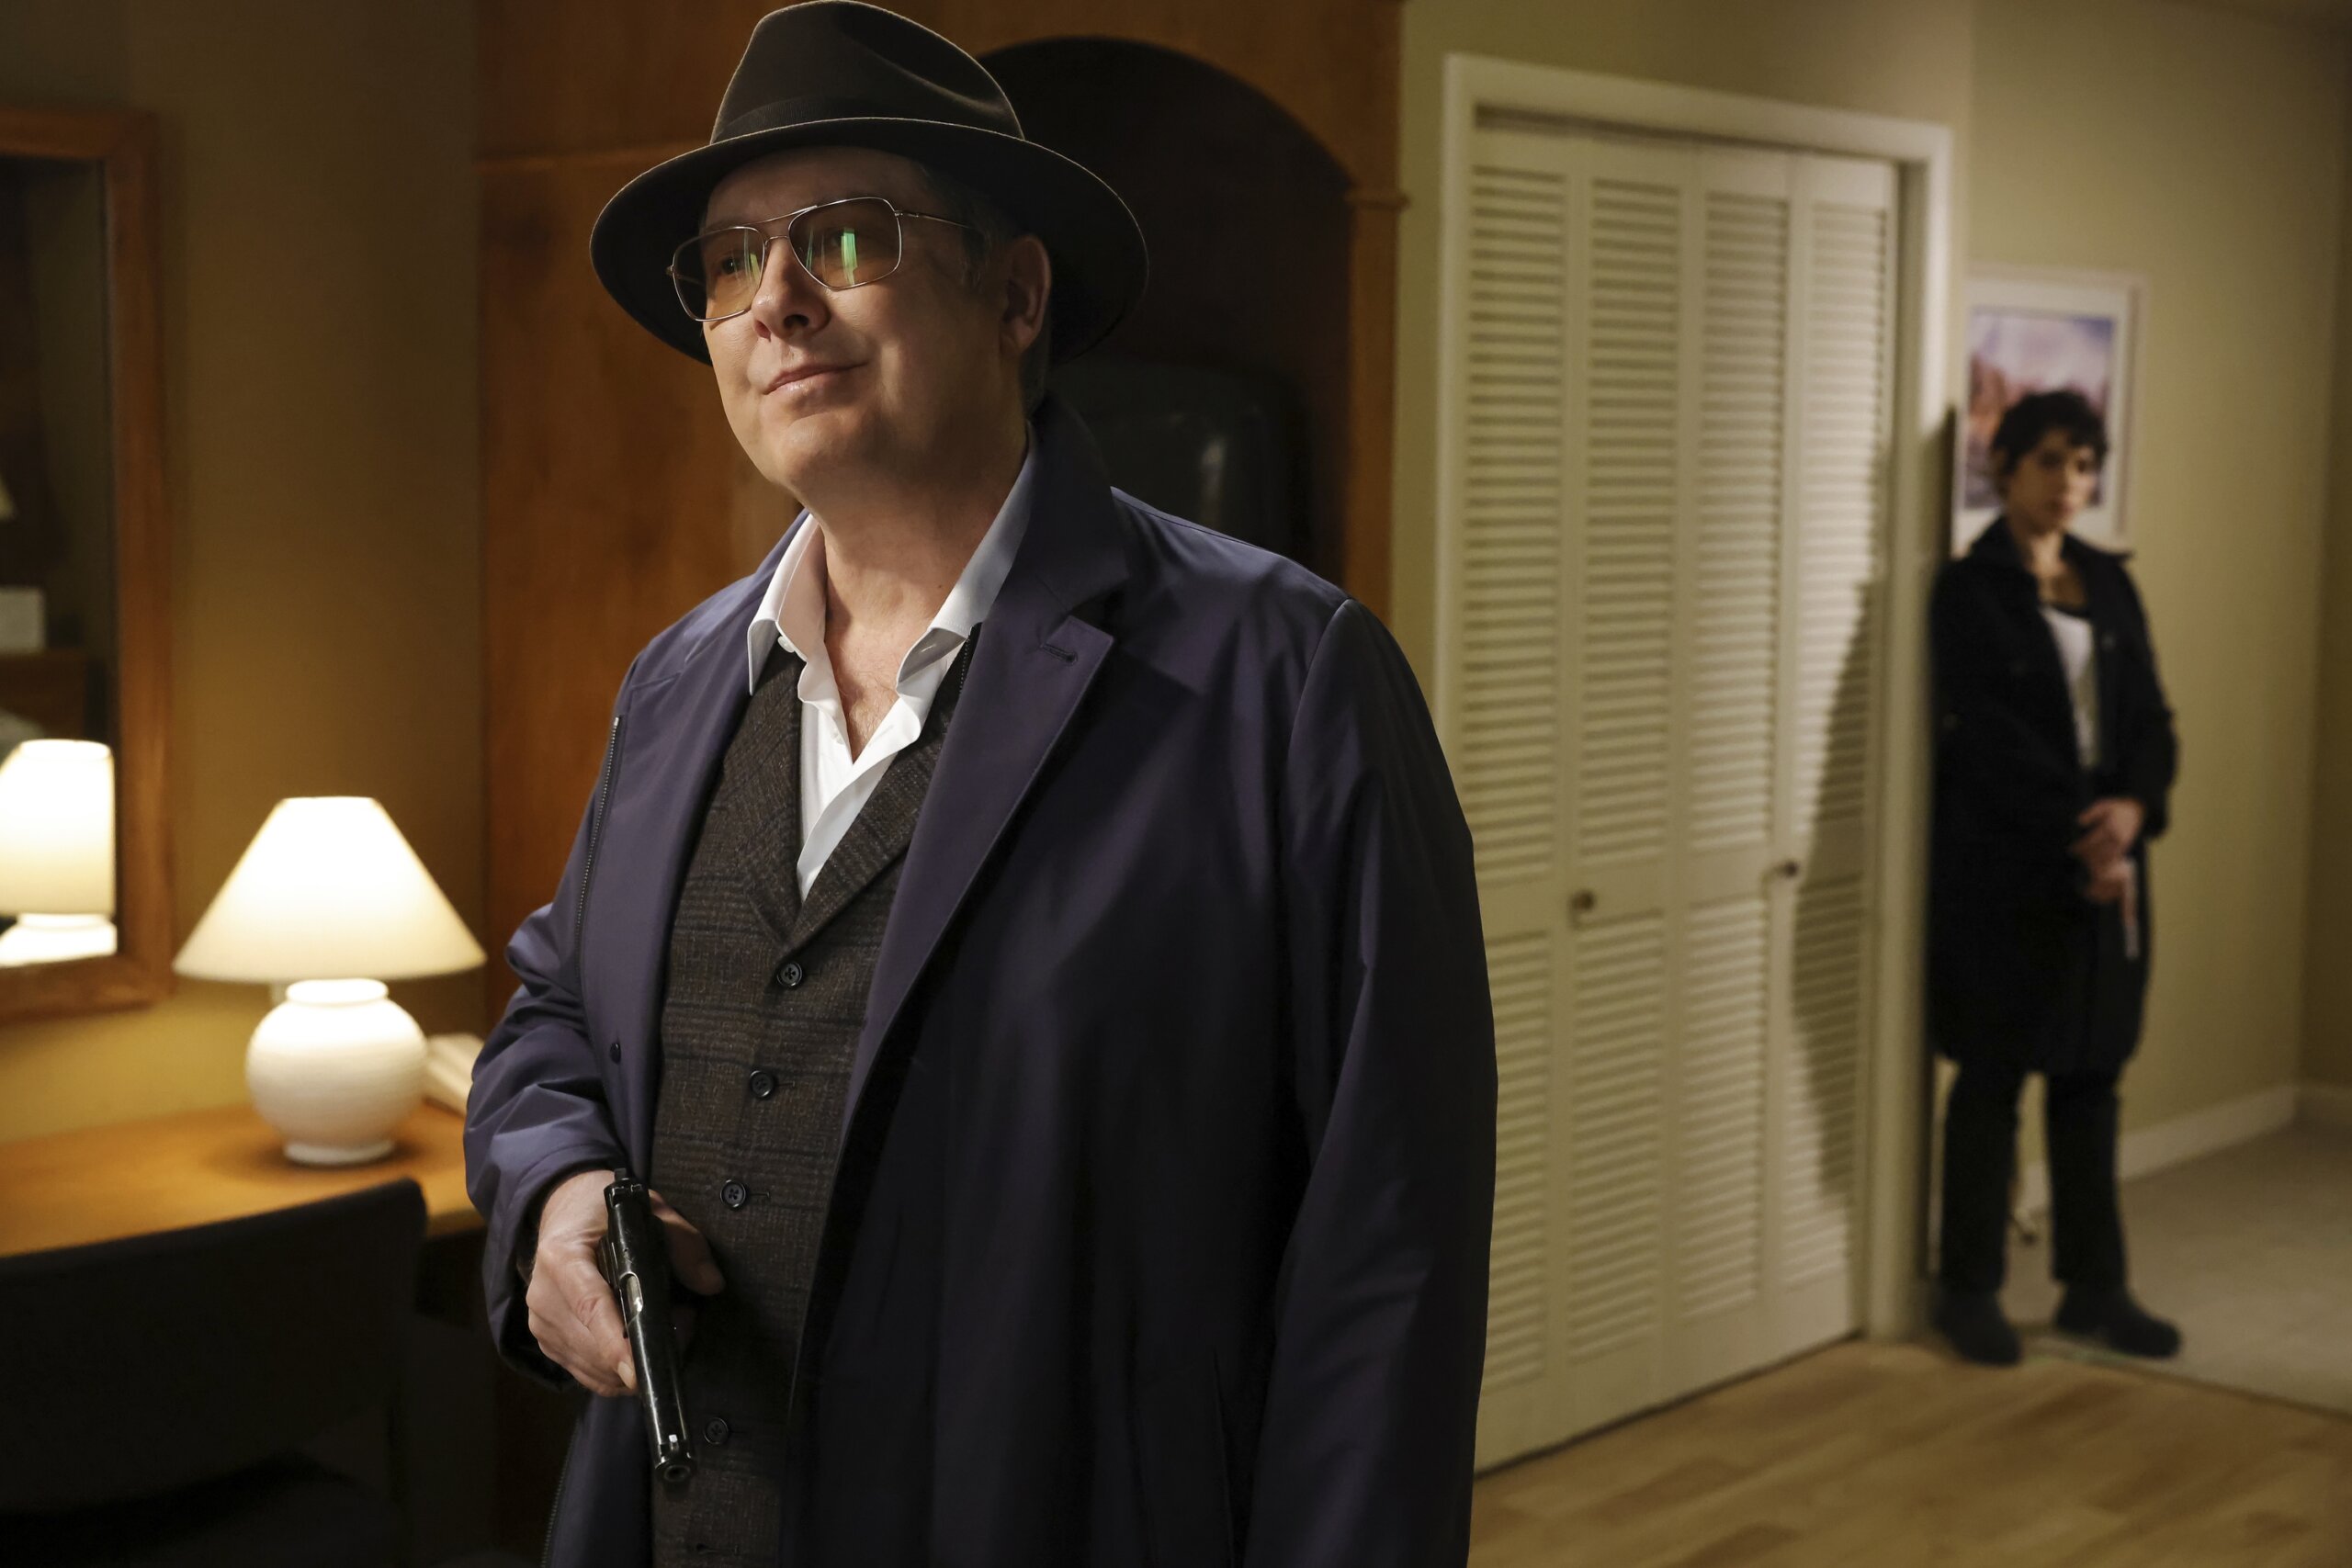 NBC is closing down ‘The Blacklist’ after decade on the air